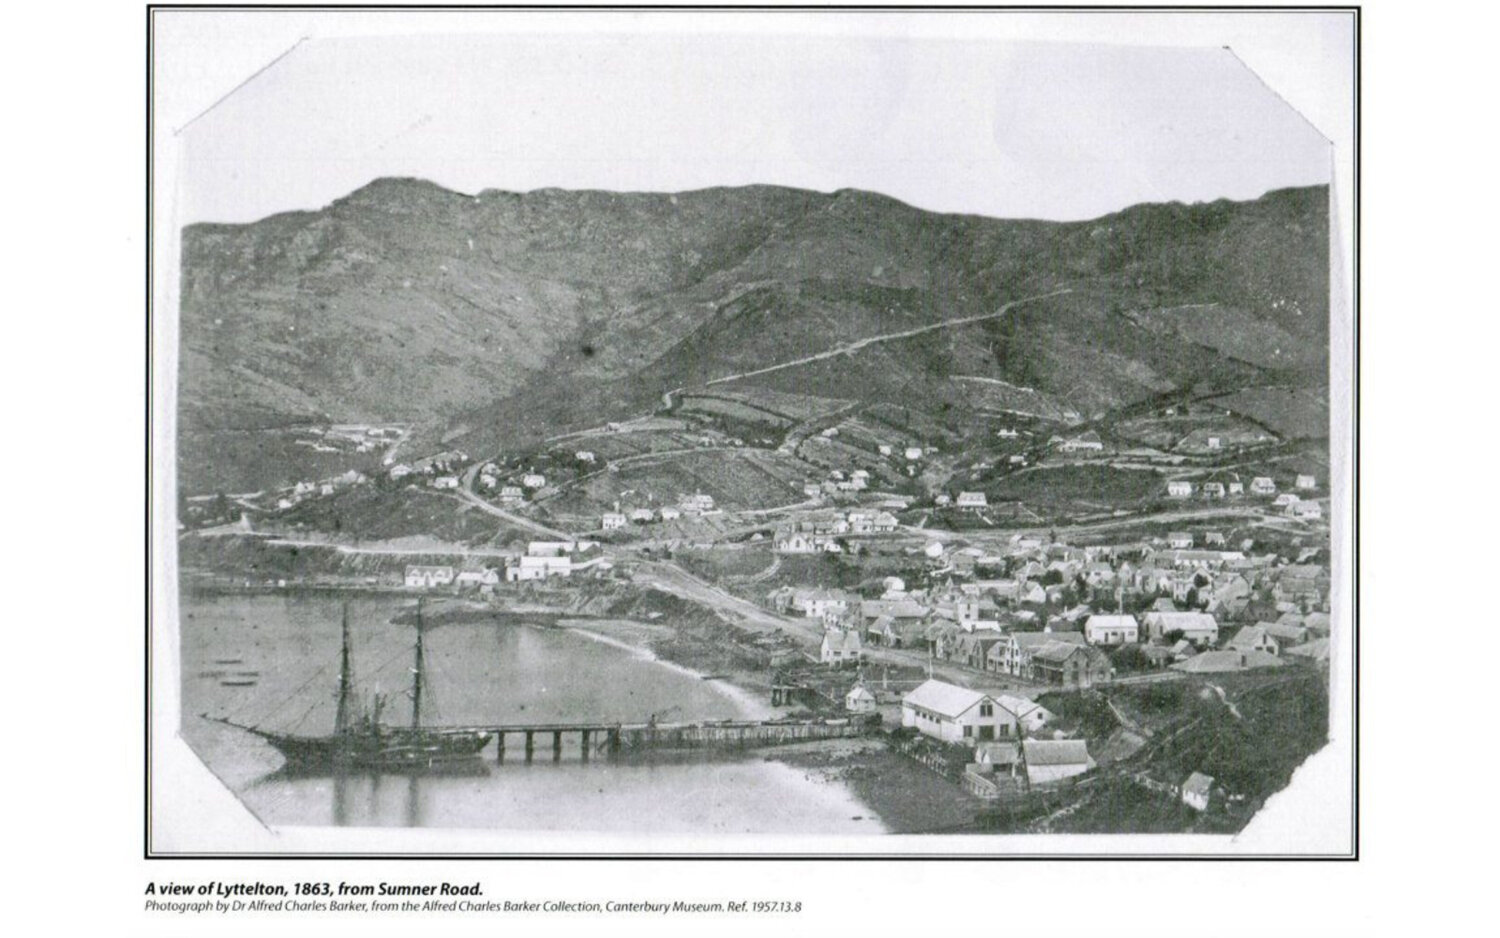 A view of Lyttelton, 1863, from Sumner Road